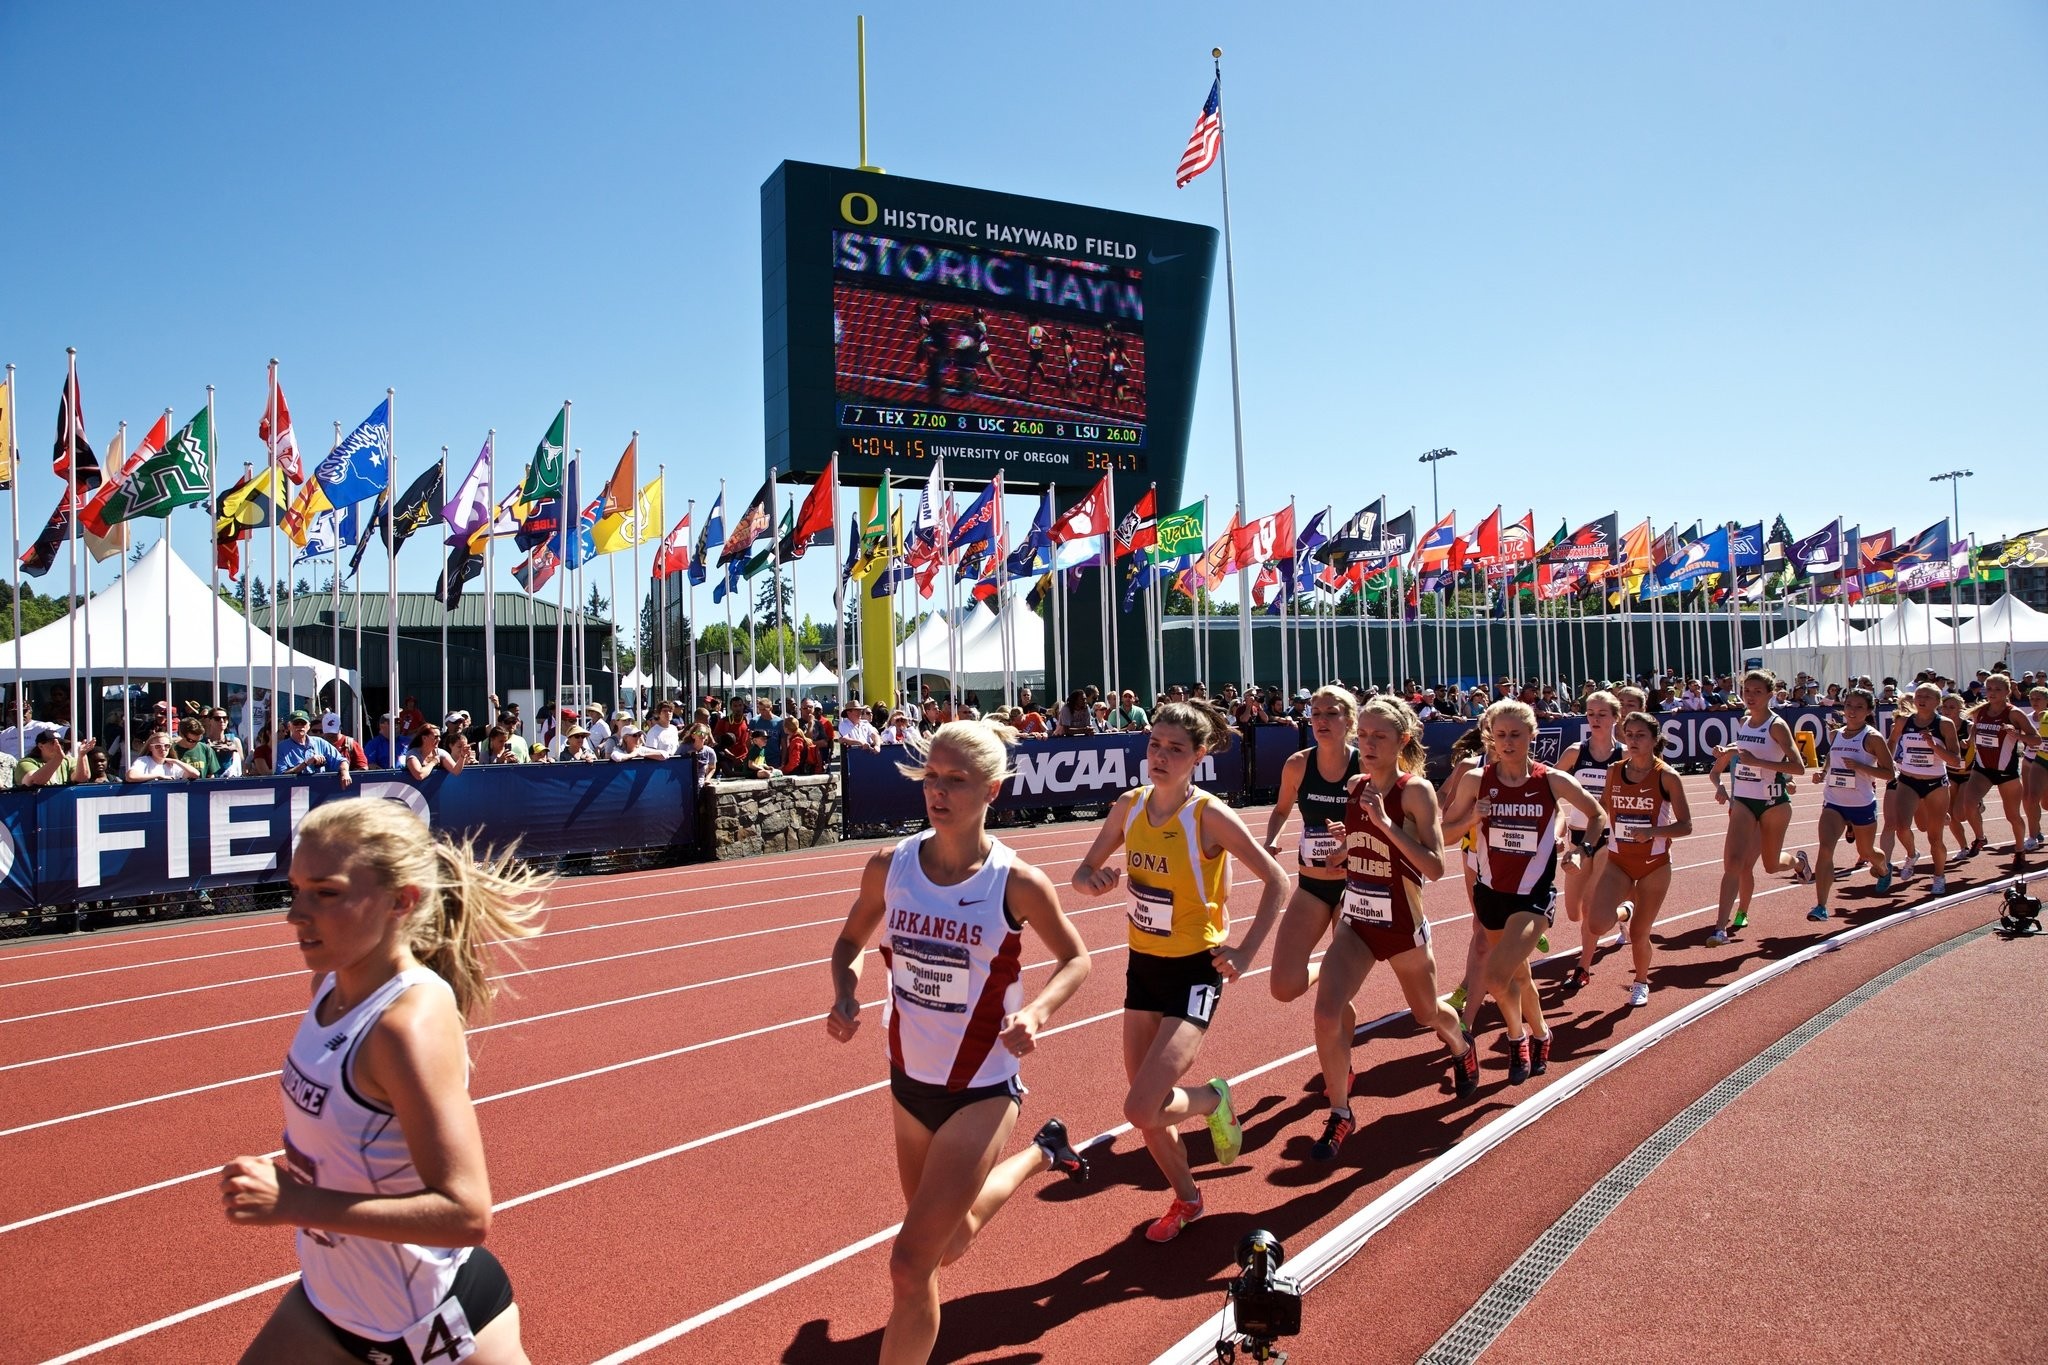 Live updates The NCAA Outdoor Track & Field Championships at Hayward Field